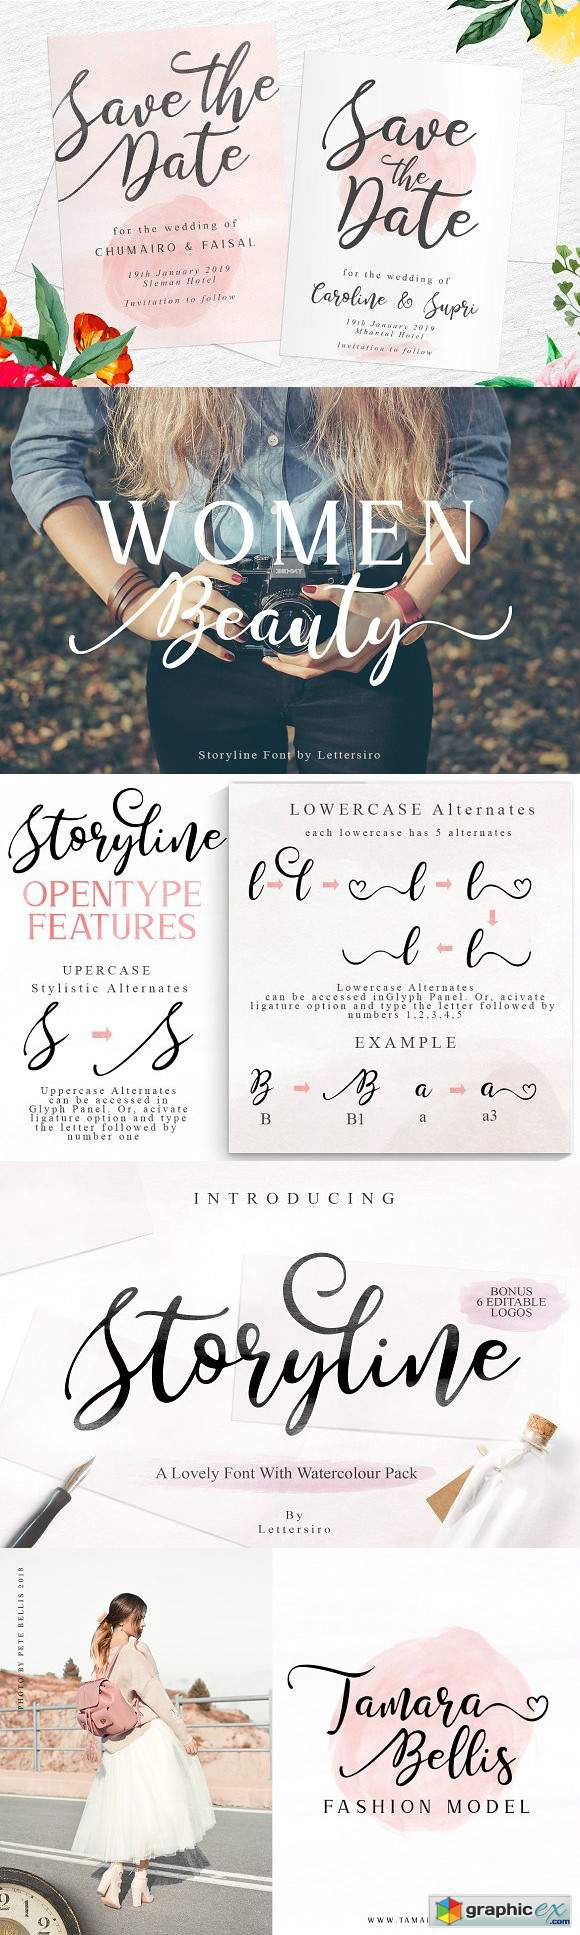 Storyline Font & Watercolour Pack